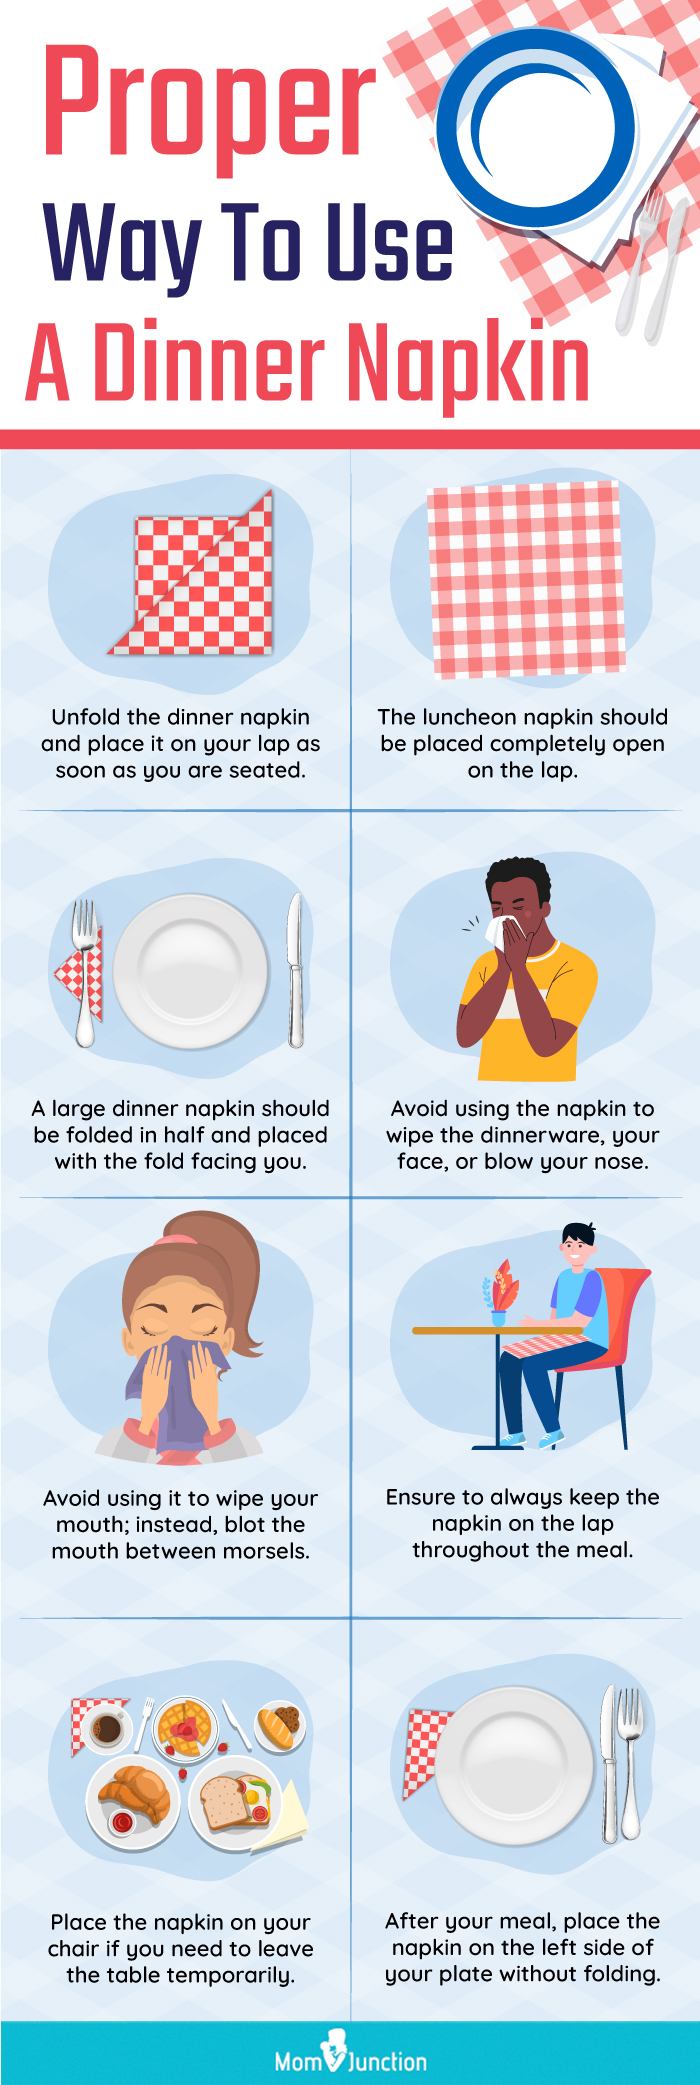 Proper Way To Use A Dinner Napkin (infographic)